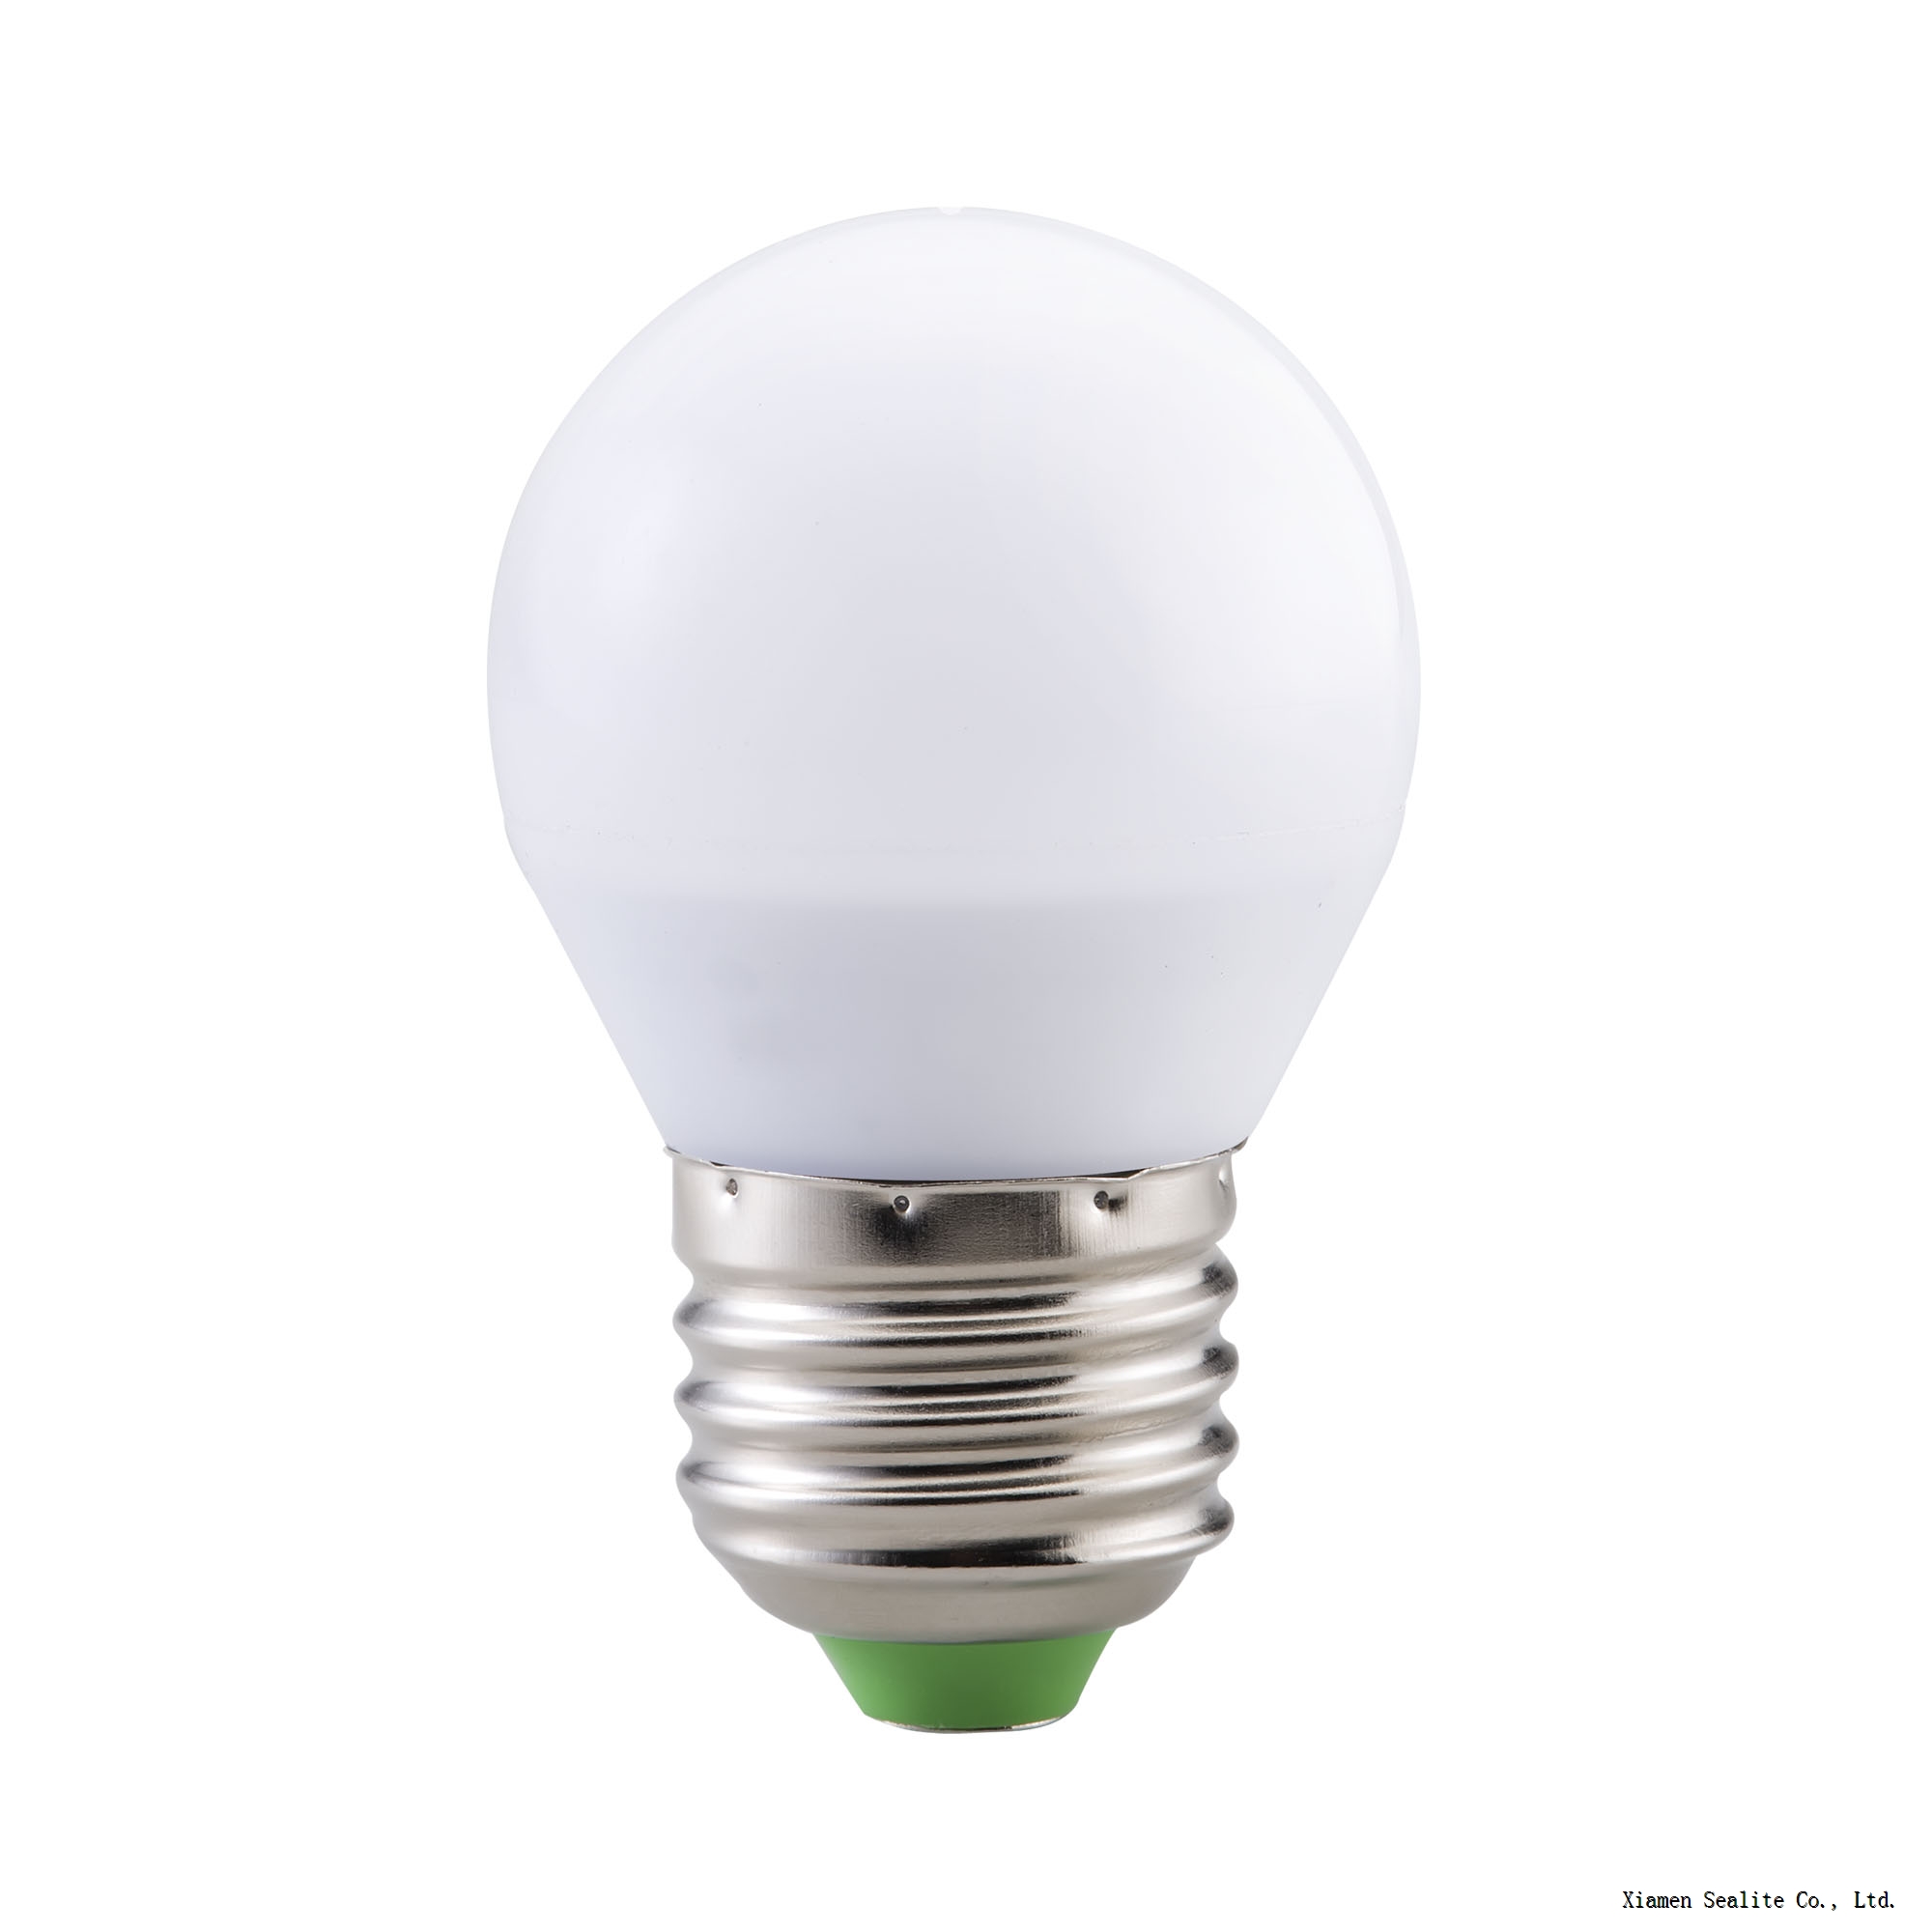 LED Global Bulb 3W with PC Cover